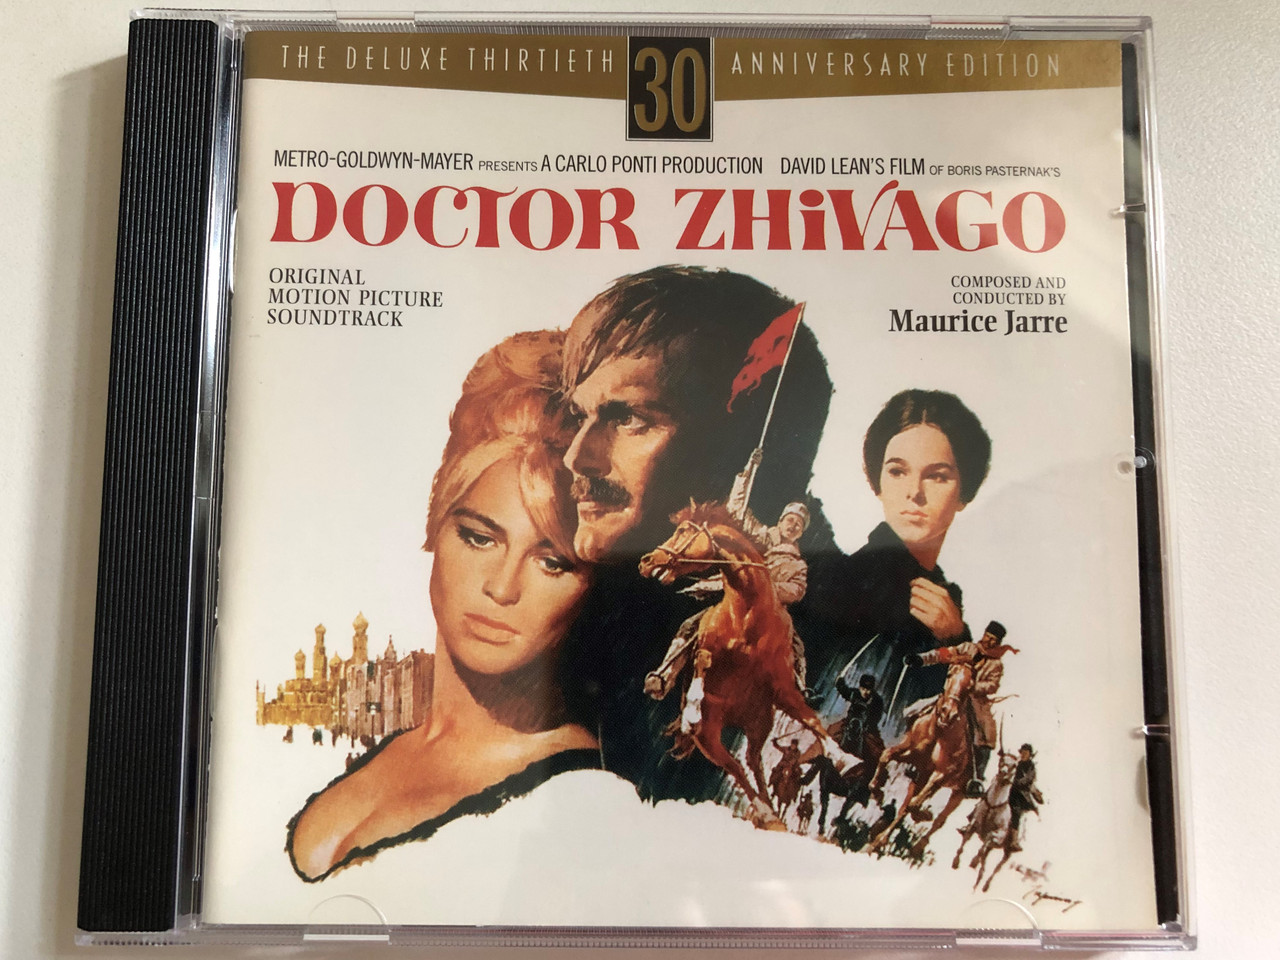 https://cdn10.bigcommerce.com/s-62bdpkt7pb/products/0/images/292526/Doctor_Zhivago_Original_Motion_Picture_Soundtrack_-_Composed_and_Conducted_By_Maurice_Jarre_The_Deluxe_Thirtieth_Anniversary_Edition_TCM_Turner_Classic_Movies_Music_Audio_CD_1995_R2_7195_1__11518.1691674001.1280.1280.JPG?c=2&_gl=1*1yhetll*_ga*MjA2NTIxMjE2MC4xNTkwNTEyNTMy*_ga_WS2VZYPC6G*MTY5MTY3MTE1OS4xMDE2LjEuMTY5MTY3MzY4My40NS4wLjA.